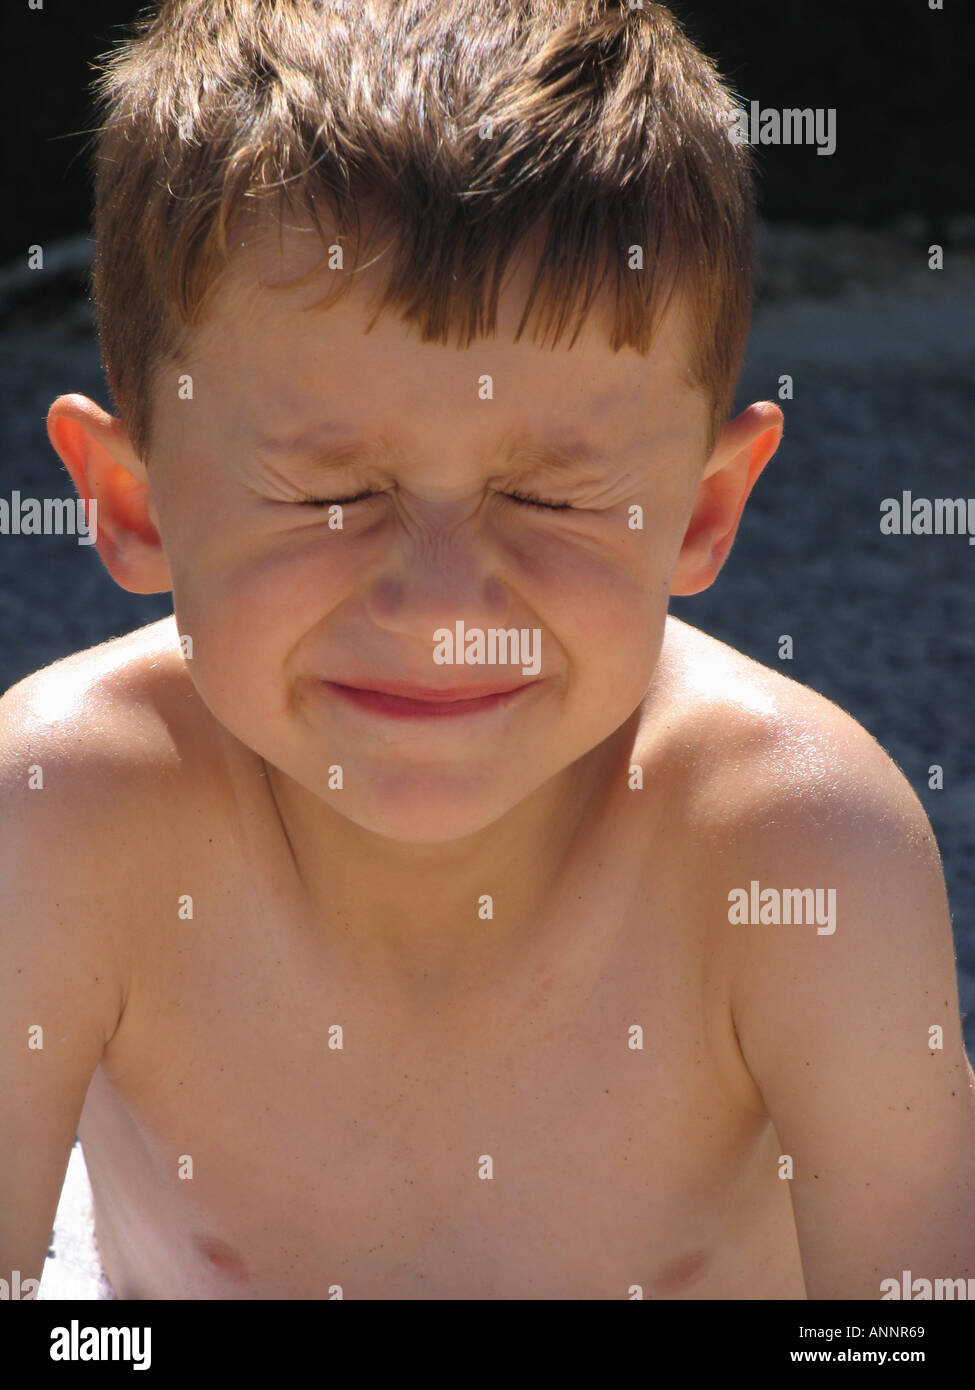 Yound boy with eyes closed Stock Photo